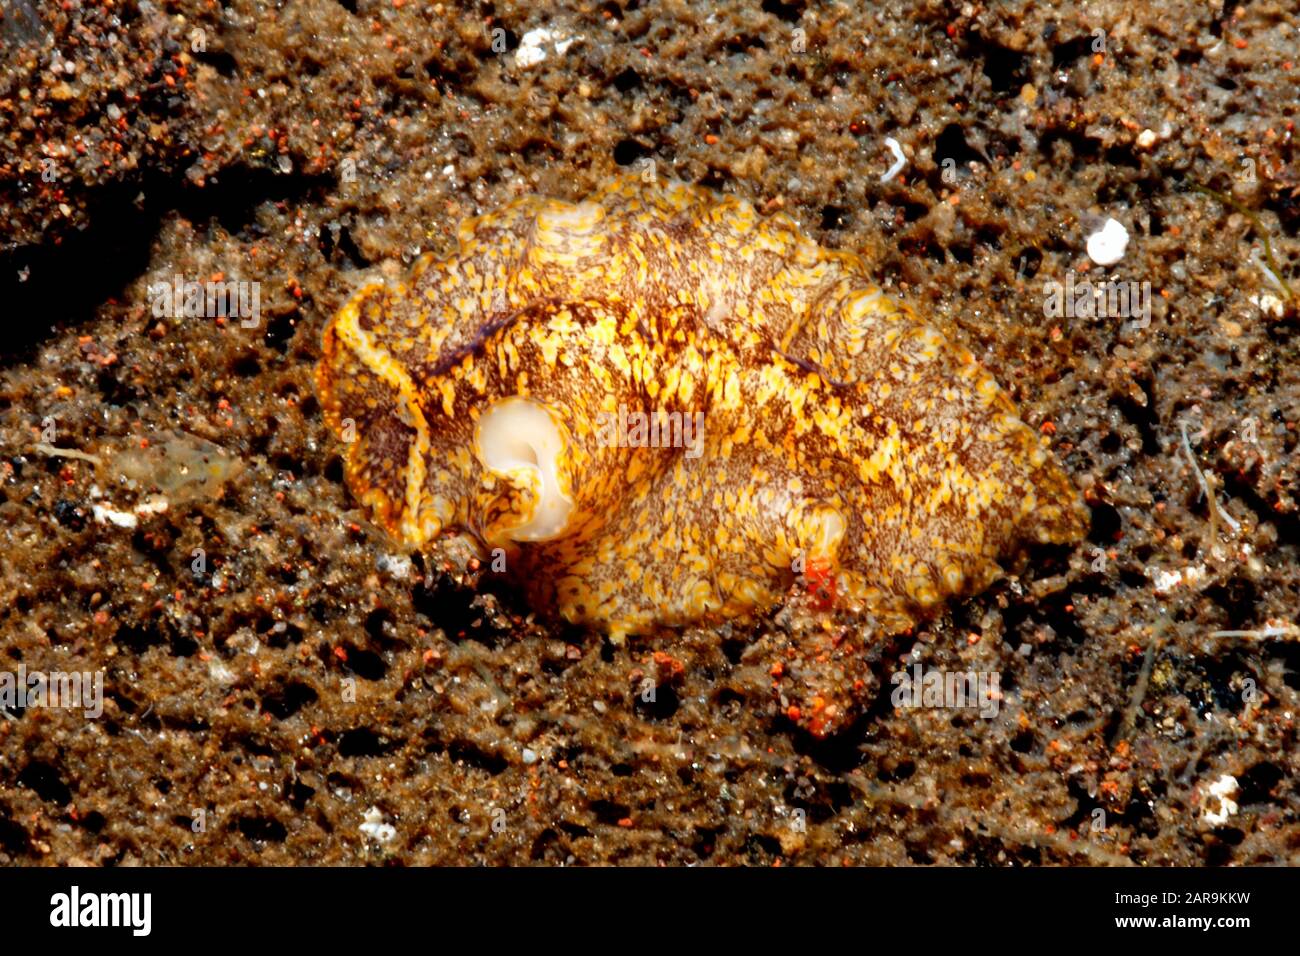 Marine Flatworm. Appears to be an undescribed species that may be new. Tulamben, Bali, Indonesia. Bali Sea, Indian Ocean Stock Photo